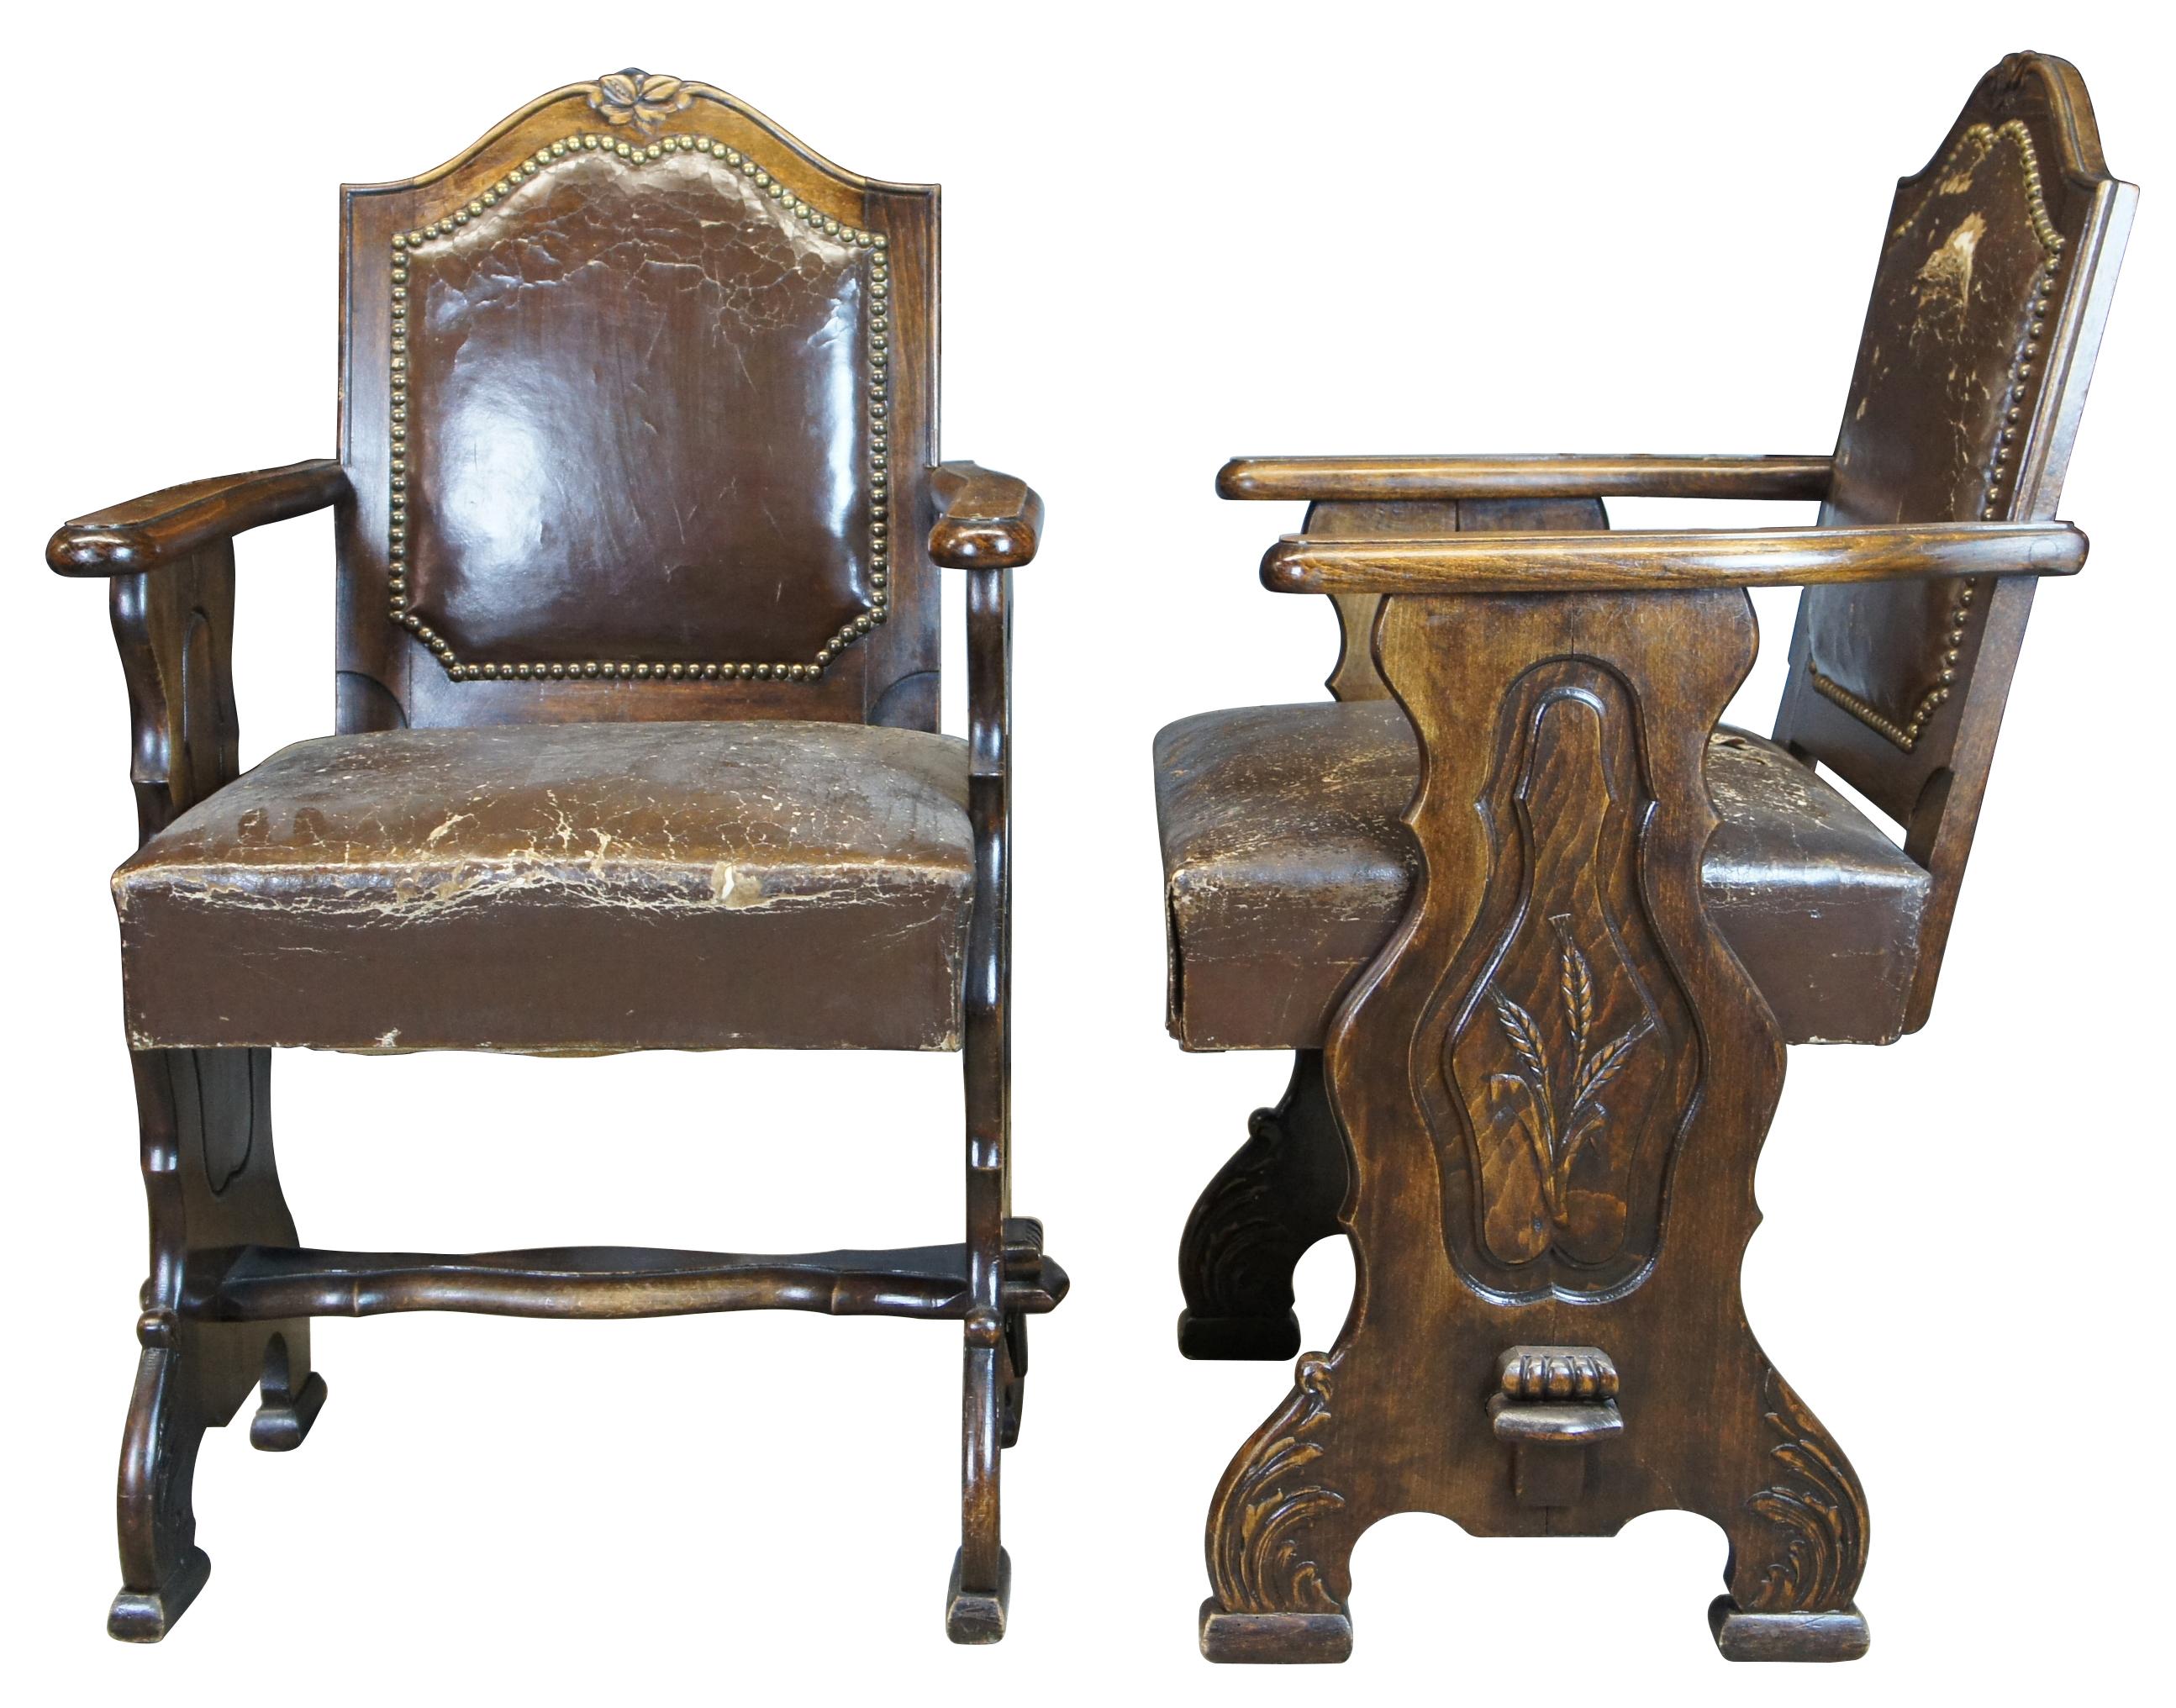 8 Antique French Country Old World oak dining chairs. An exquisite and unique form with molded side panels featuring wheat carvings and acanthus blocked feet. Upholstered in a brown leather with nailhead trim.